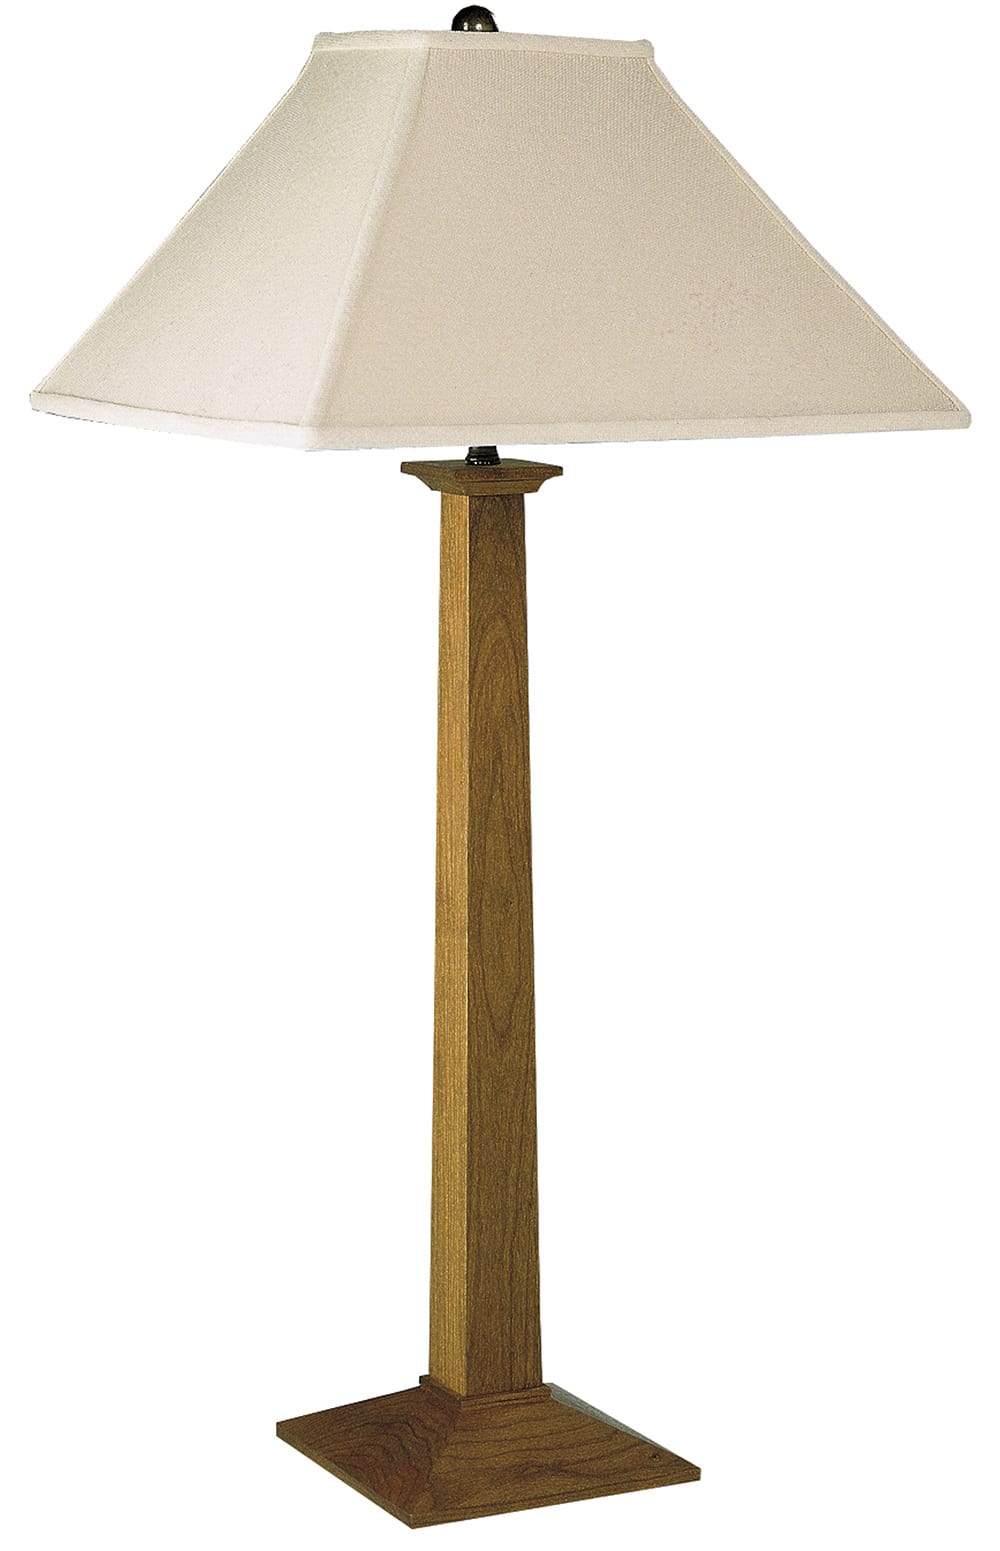 Square Base Table Lamp with Linen Shade - Stickley Brand